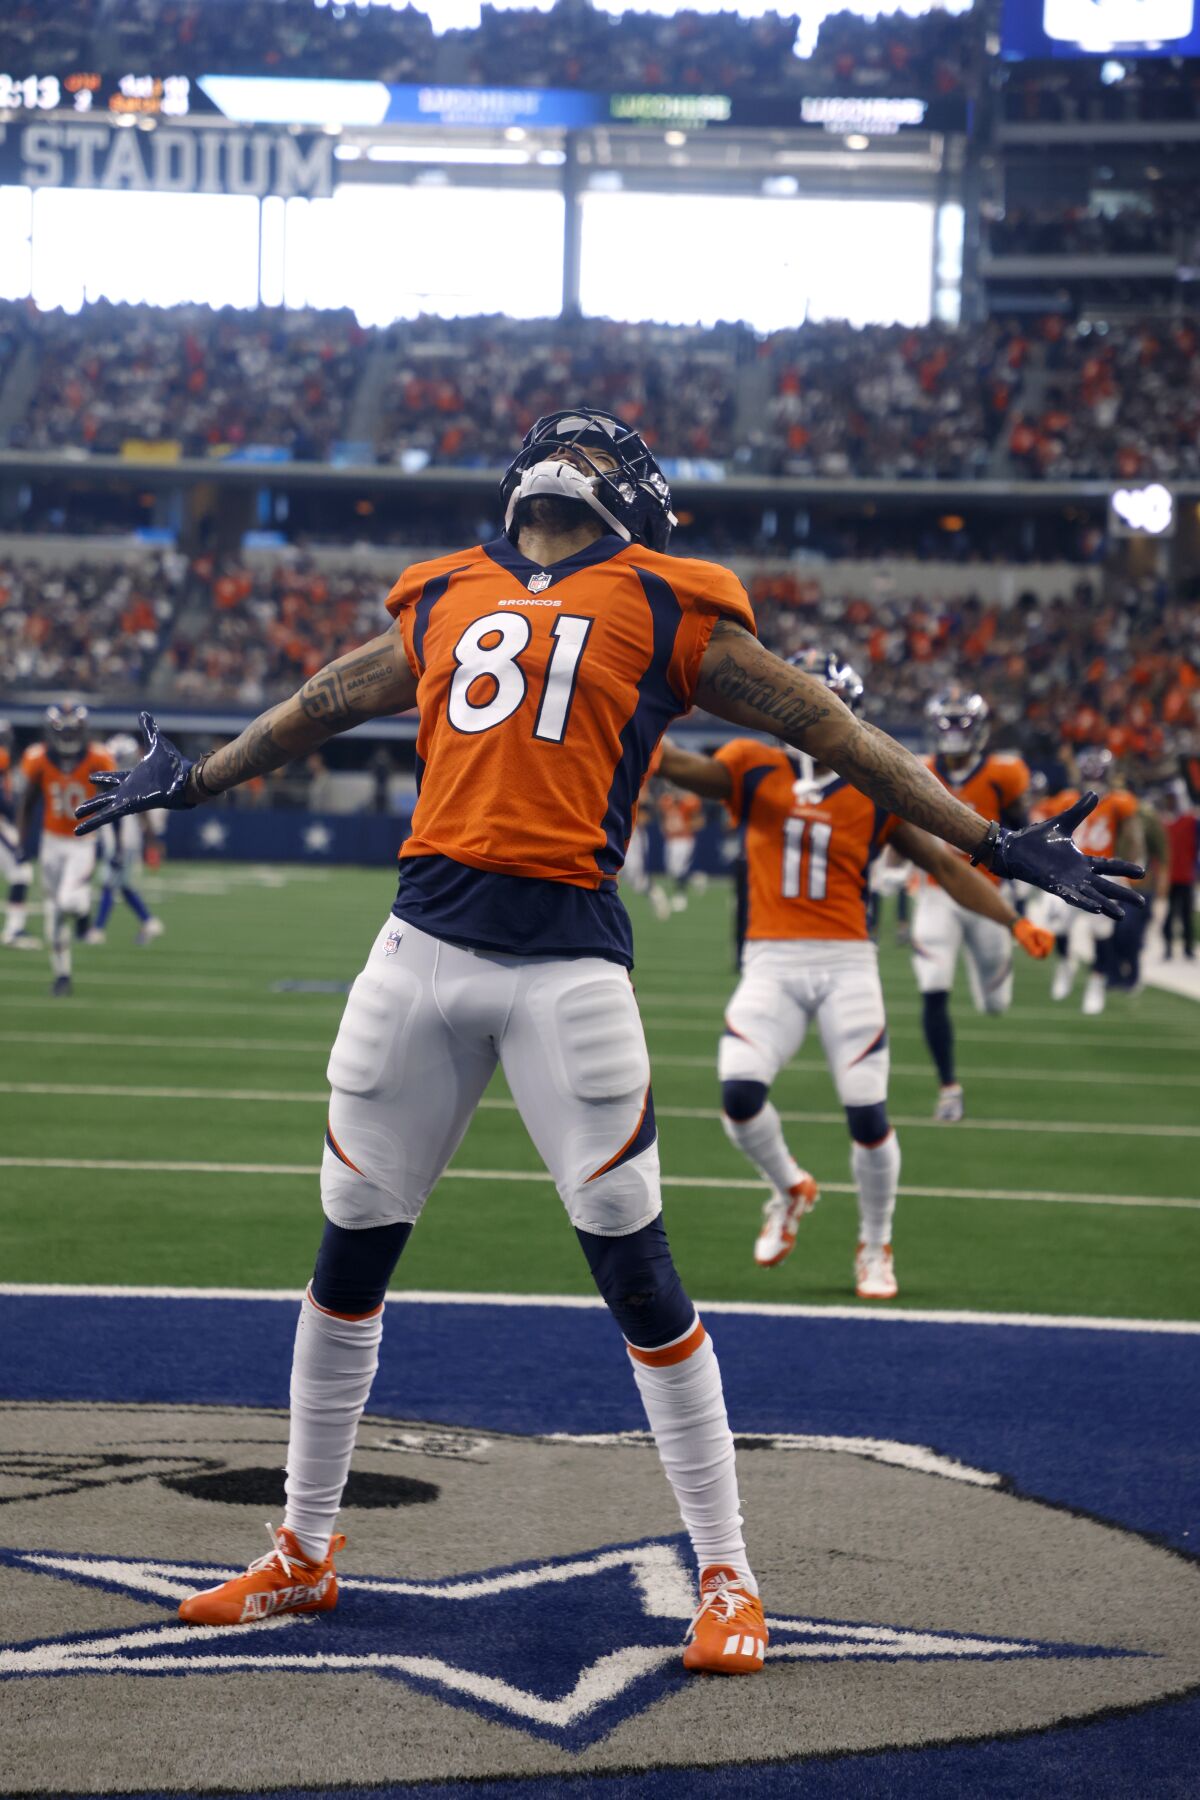 Denver Broncos wide receiver Tim Patrick (81) celebrates catching a touchdown pass in the first half of an NFL football game against the Dallas Cowboys in Arlington, Texas, Sunday, Nov. 7, 2021. (AP Photo/Michael Ainsworth)